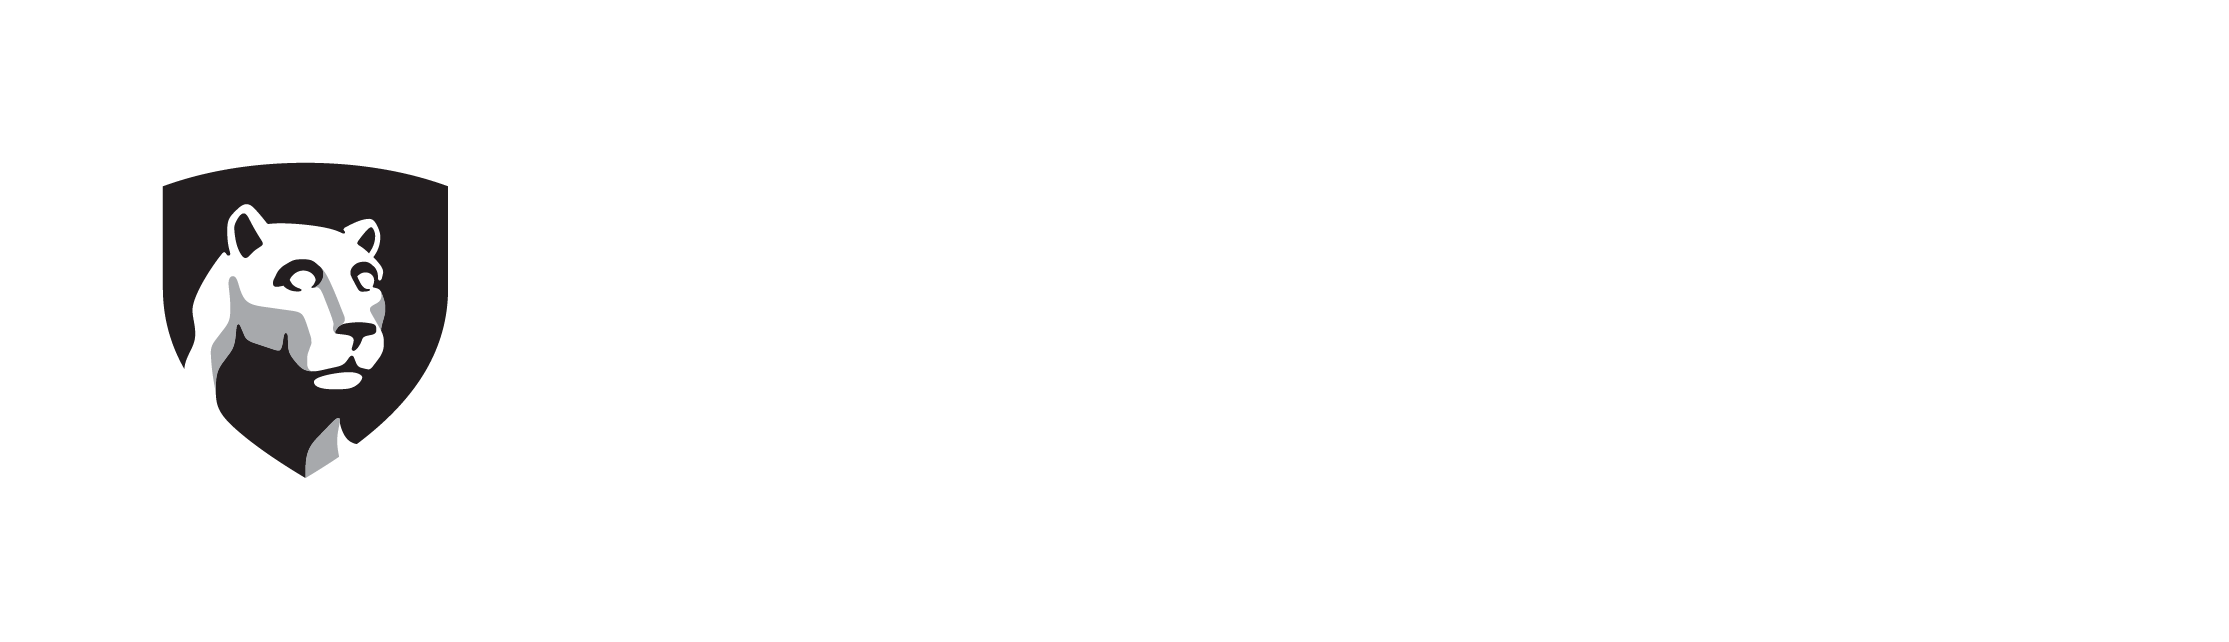 Penn State College of Arts and Architecture